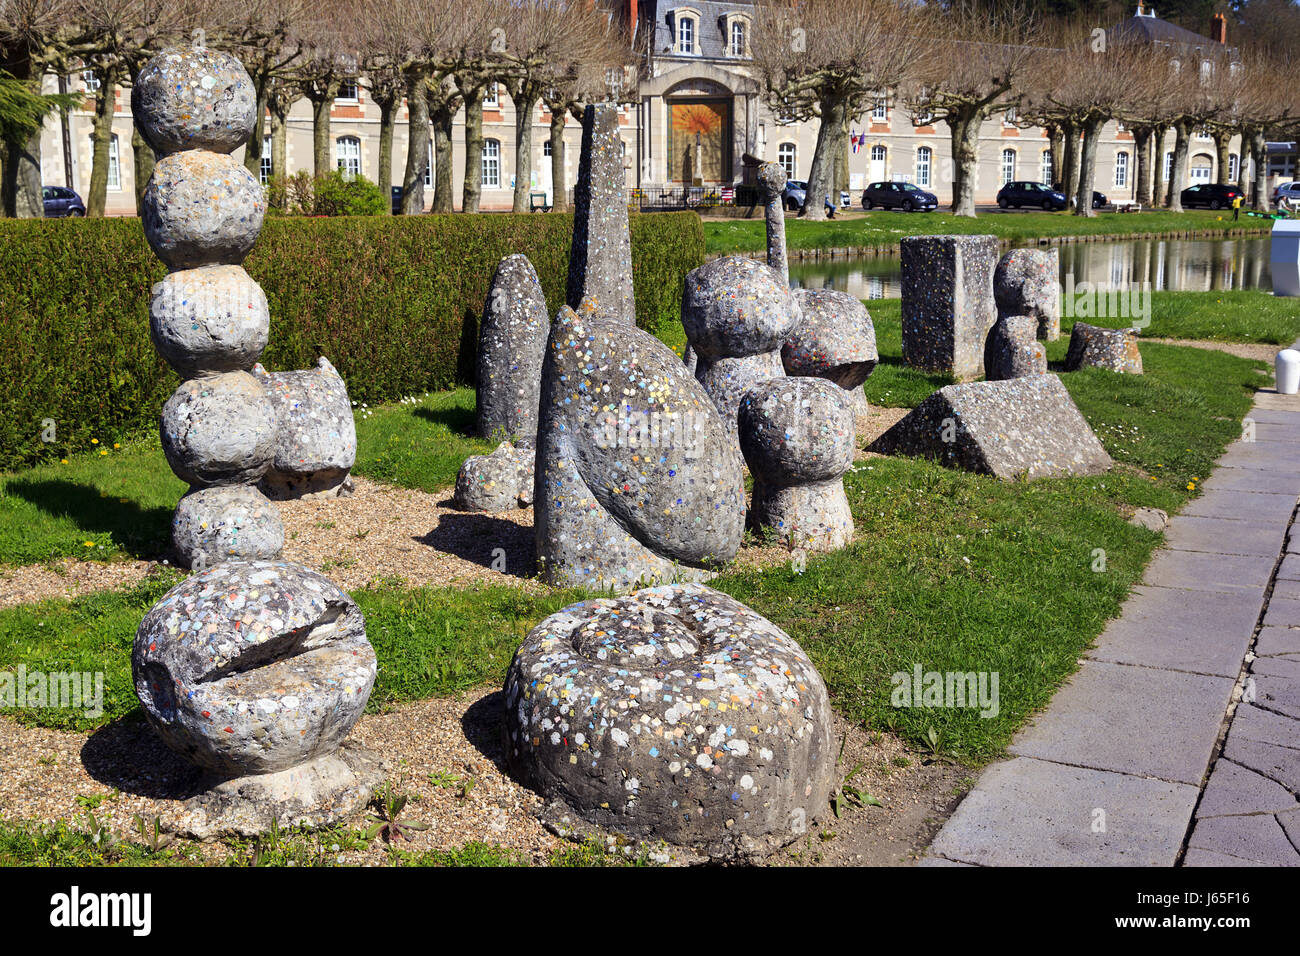 Stone Sculptures at Briare Lock, France Stock Photo